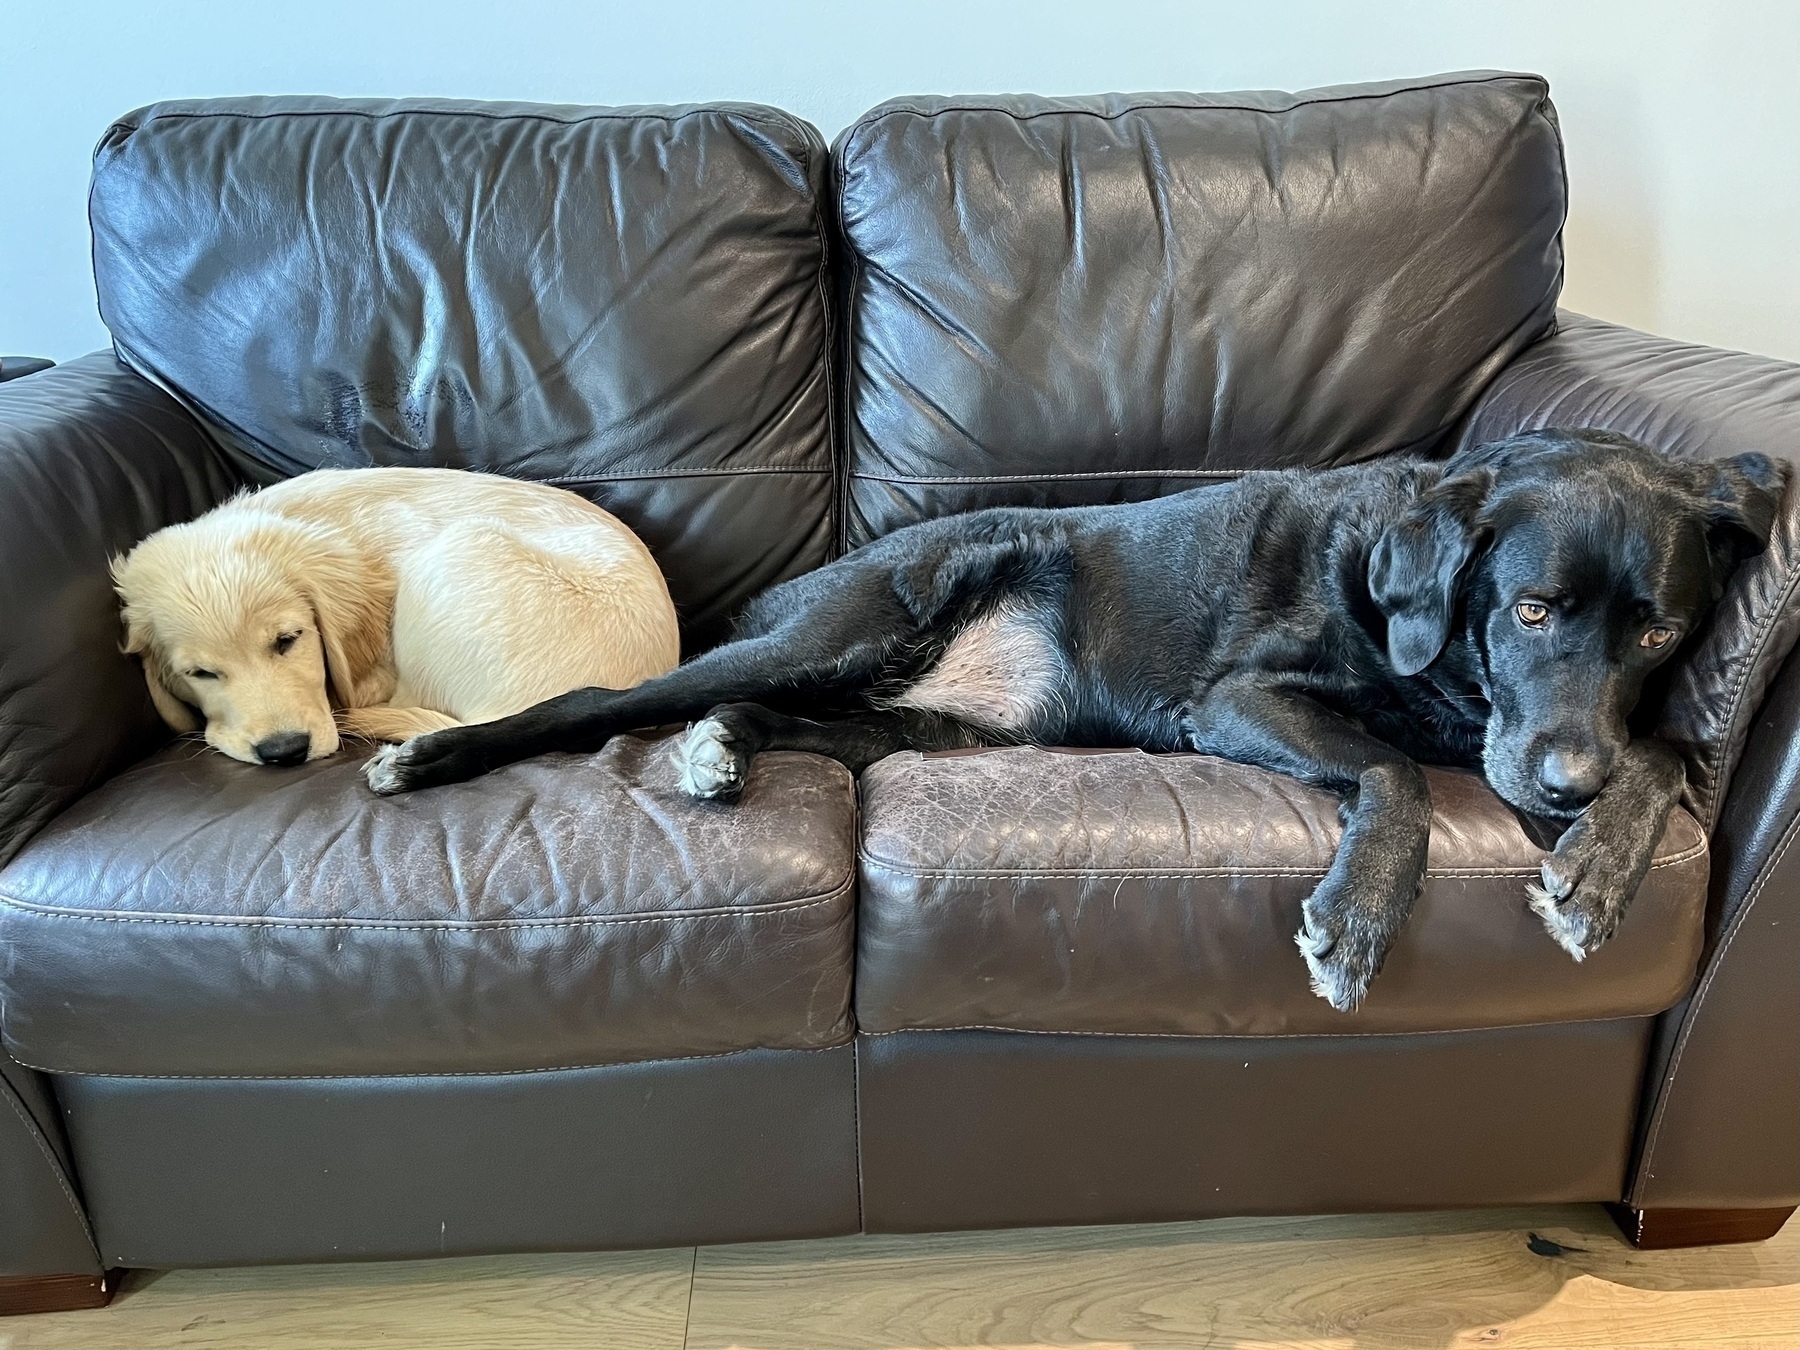 Auto-generated description: Two dogs, one golden retriever puppy and one adult black Labrador, are resting on a dark brown leather couch.